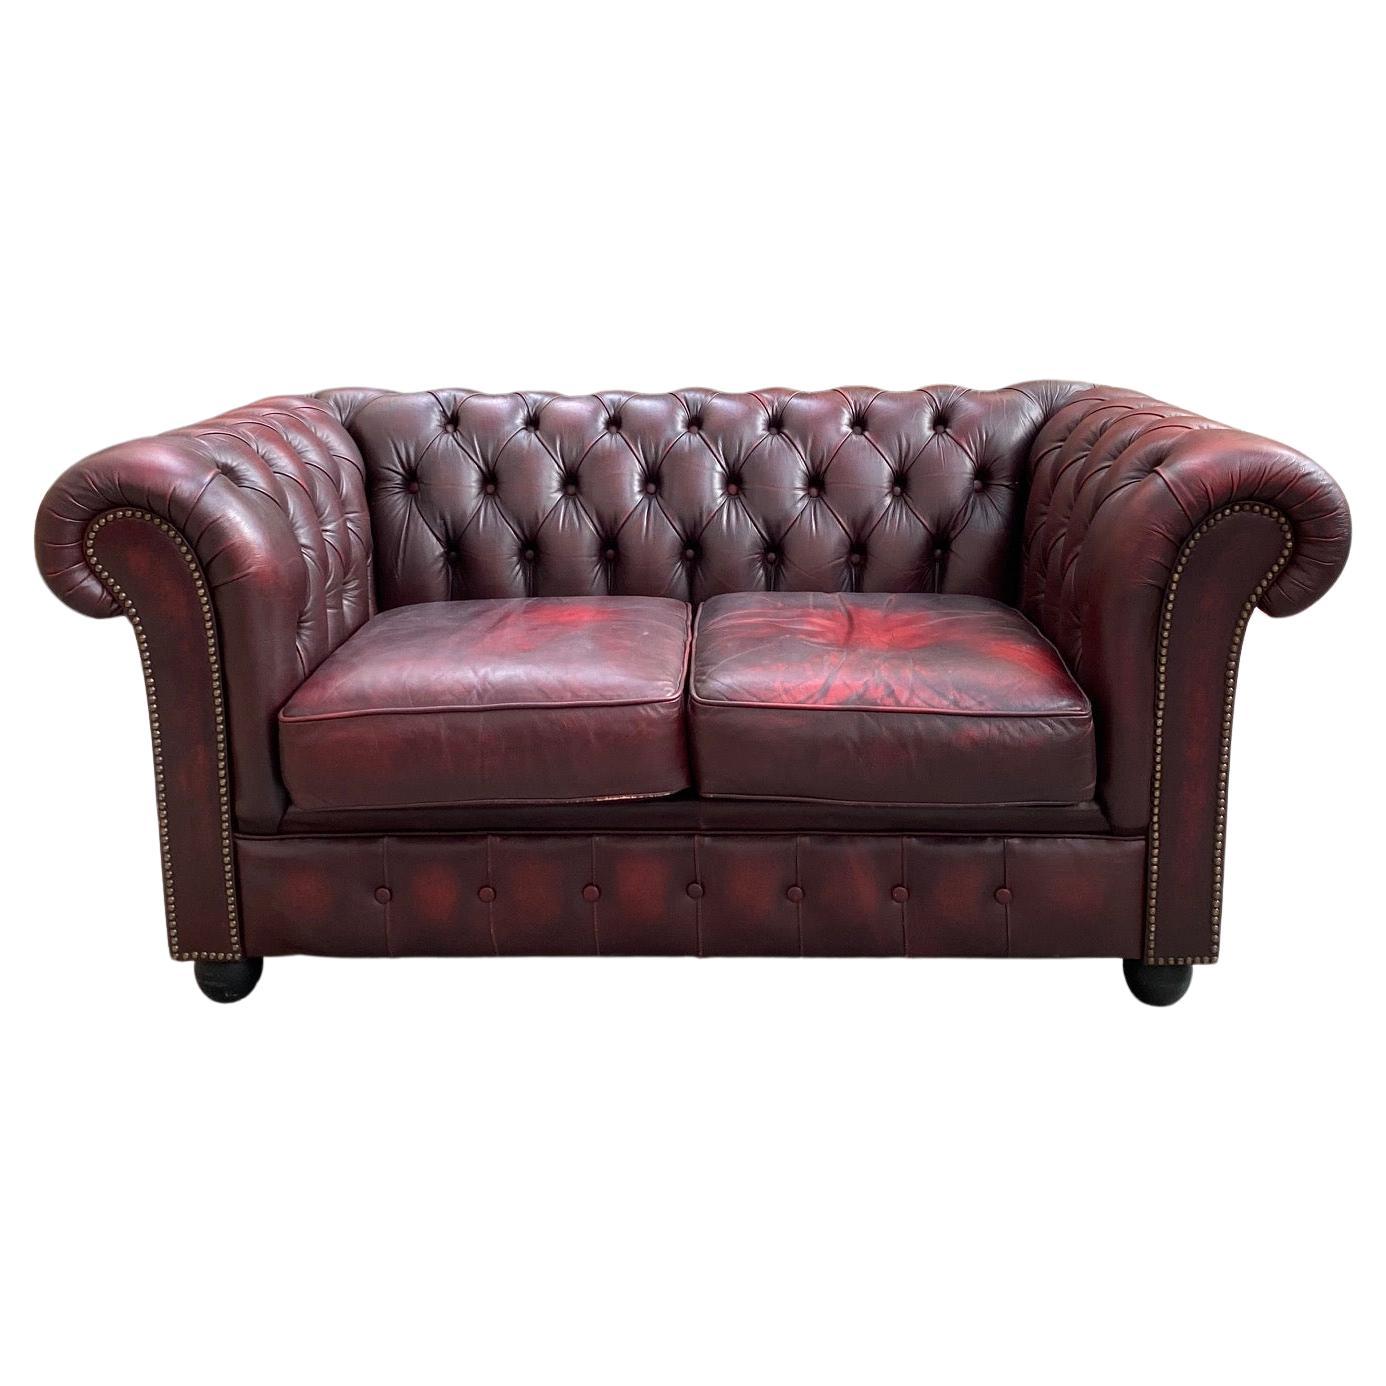 2-Seater Vintage Chesterfield Sofa For Sale